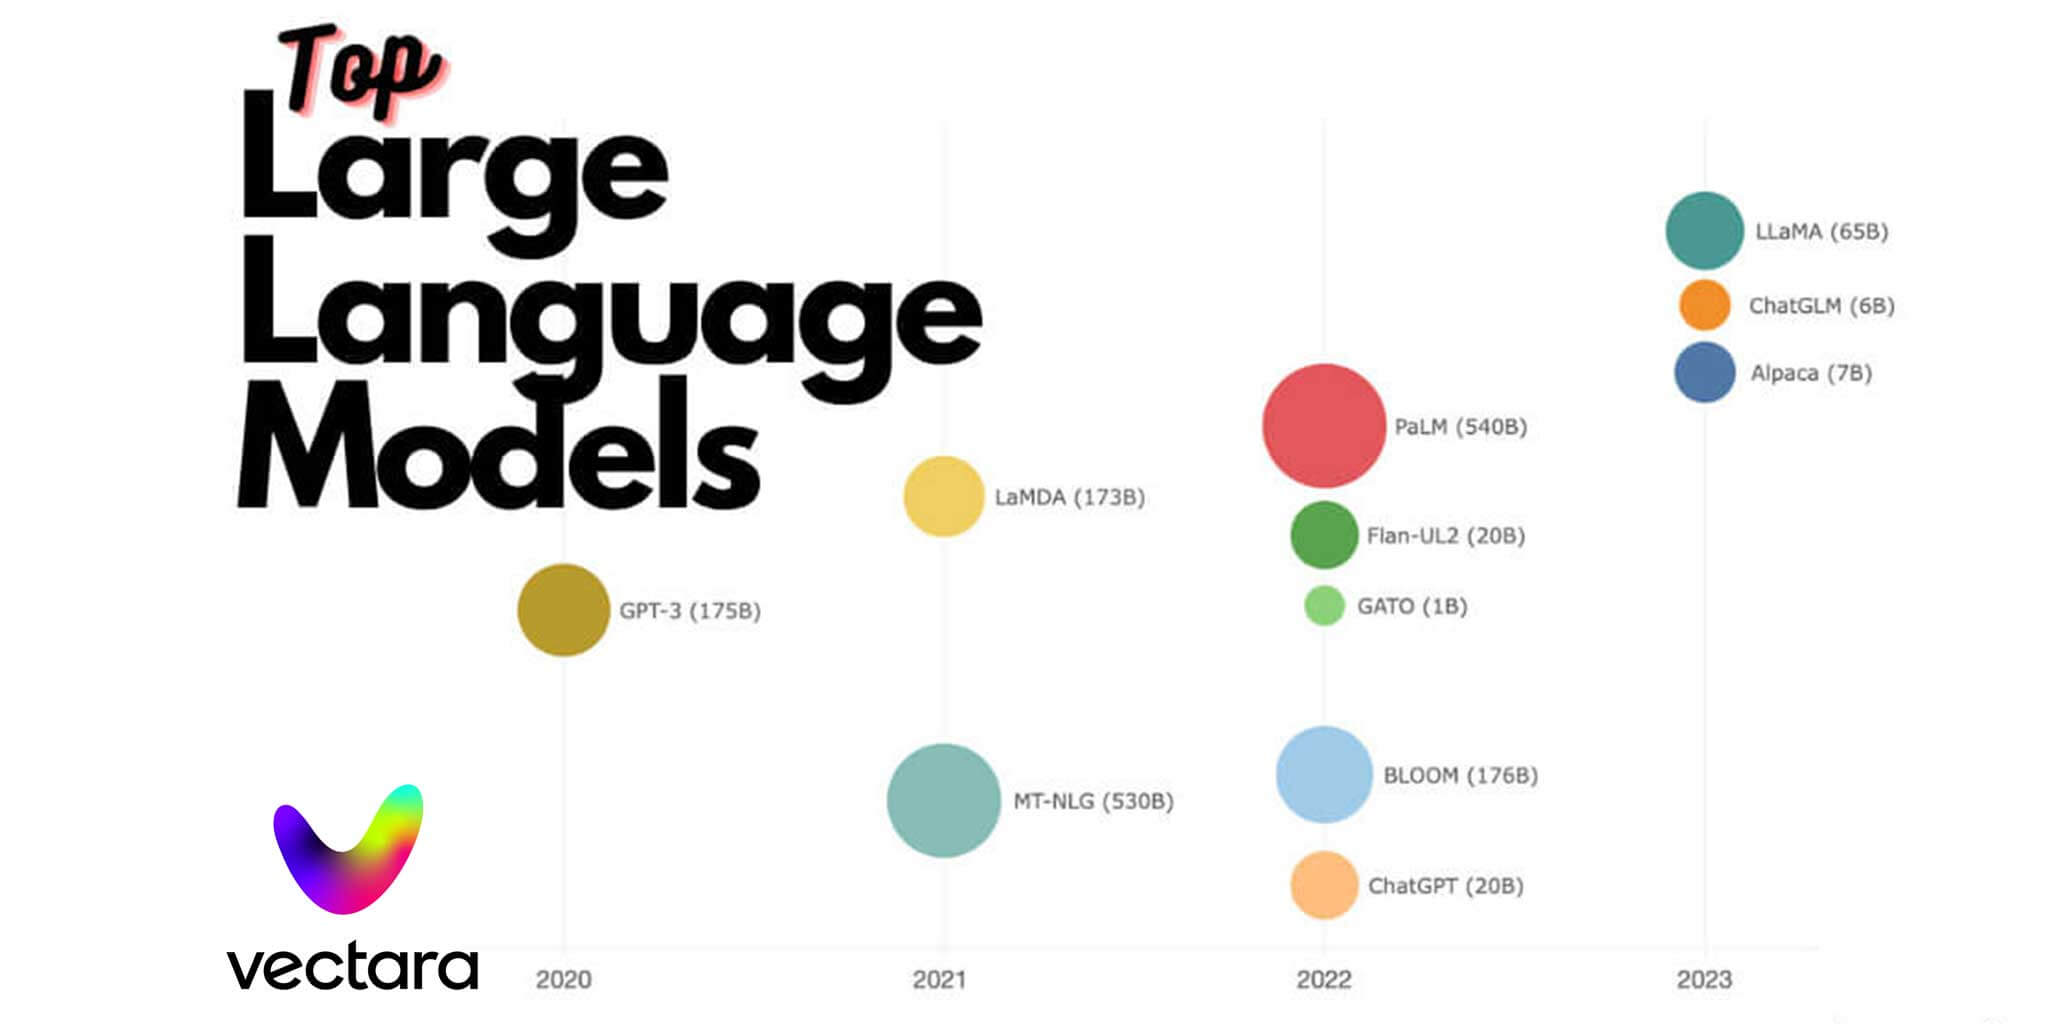 What Is a Large Language Model (LLM)?